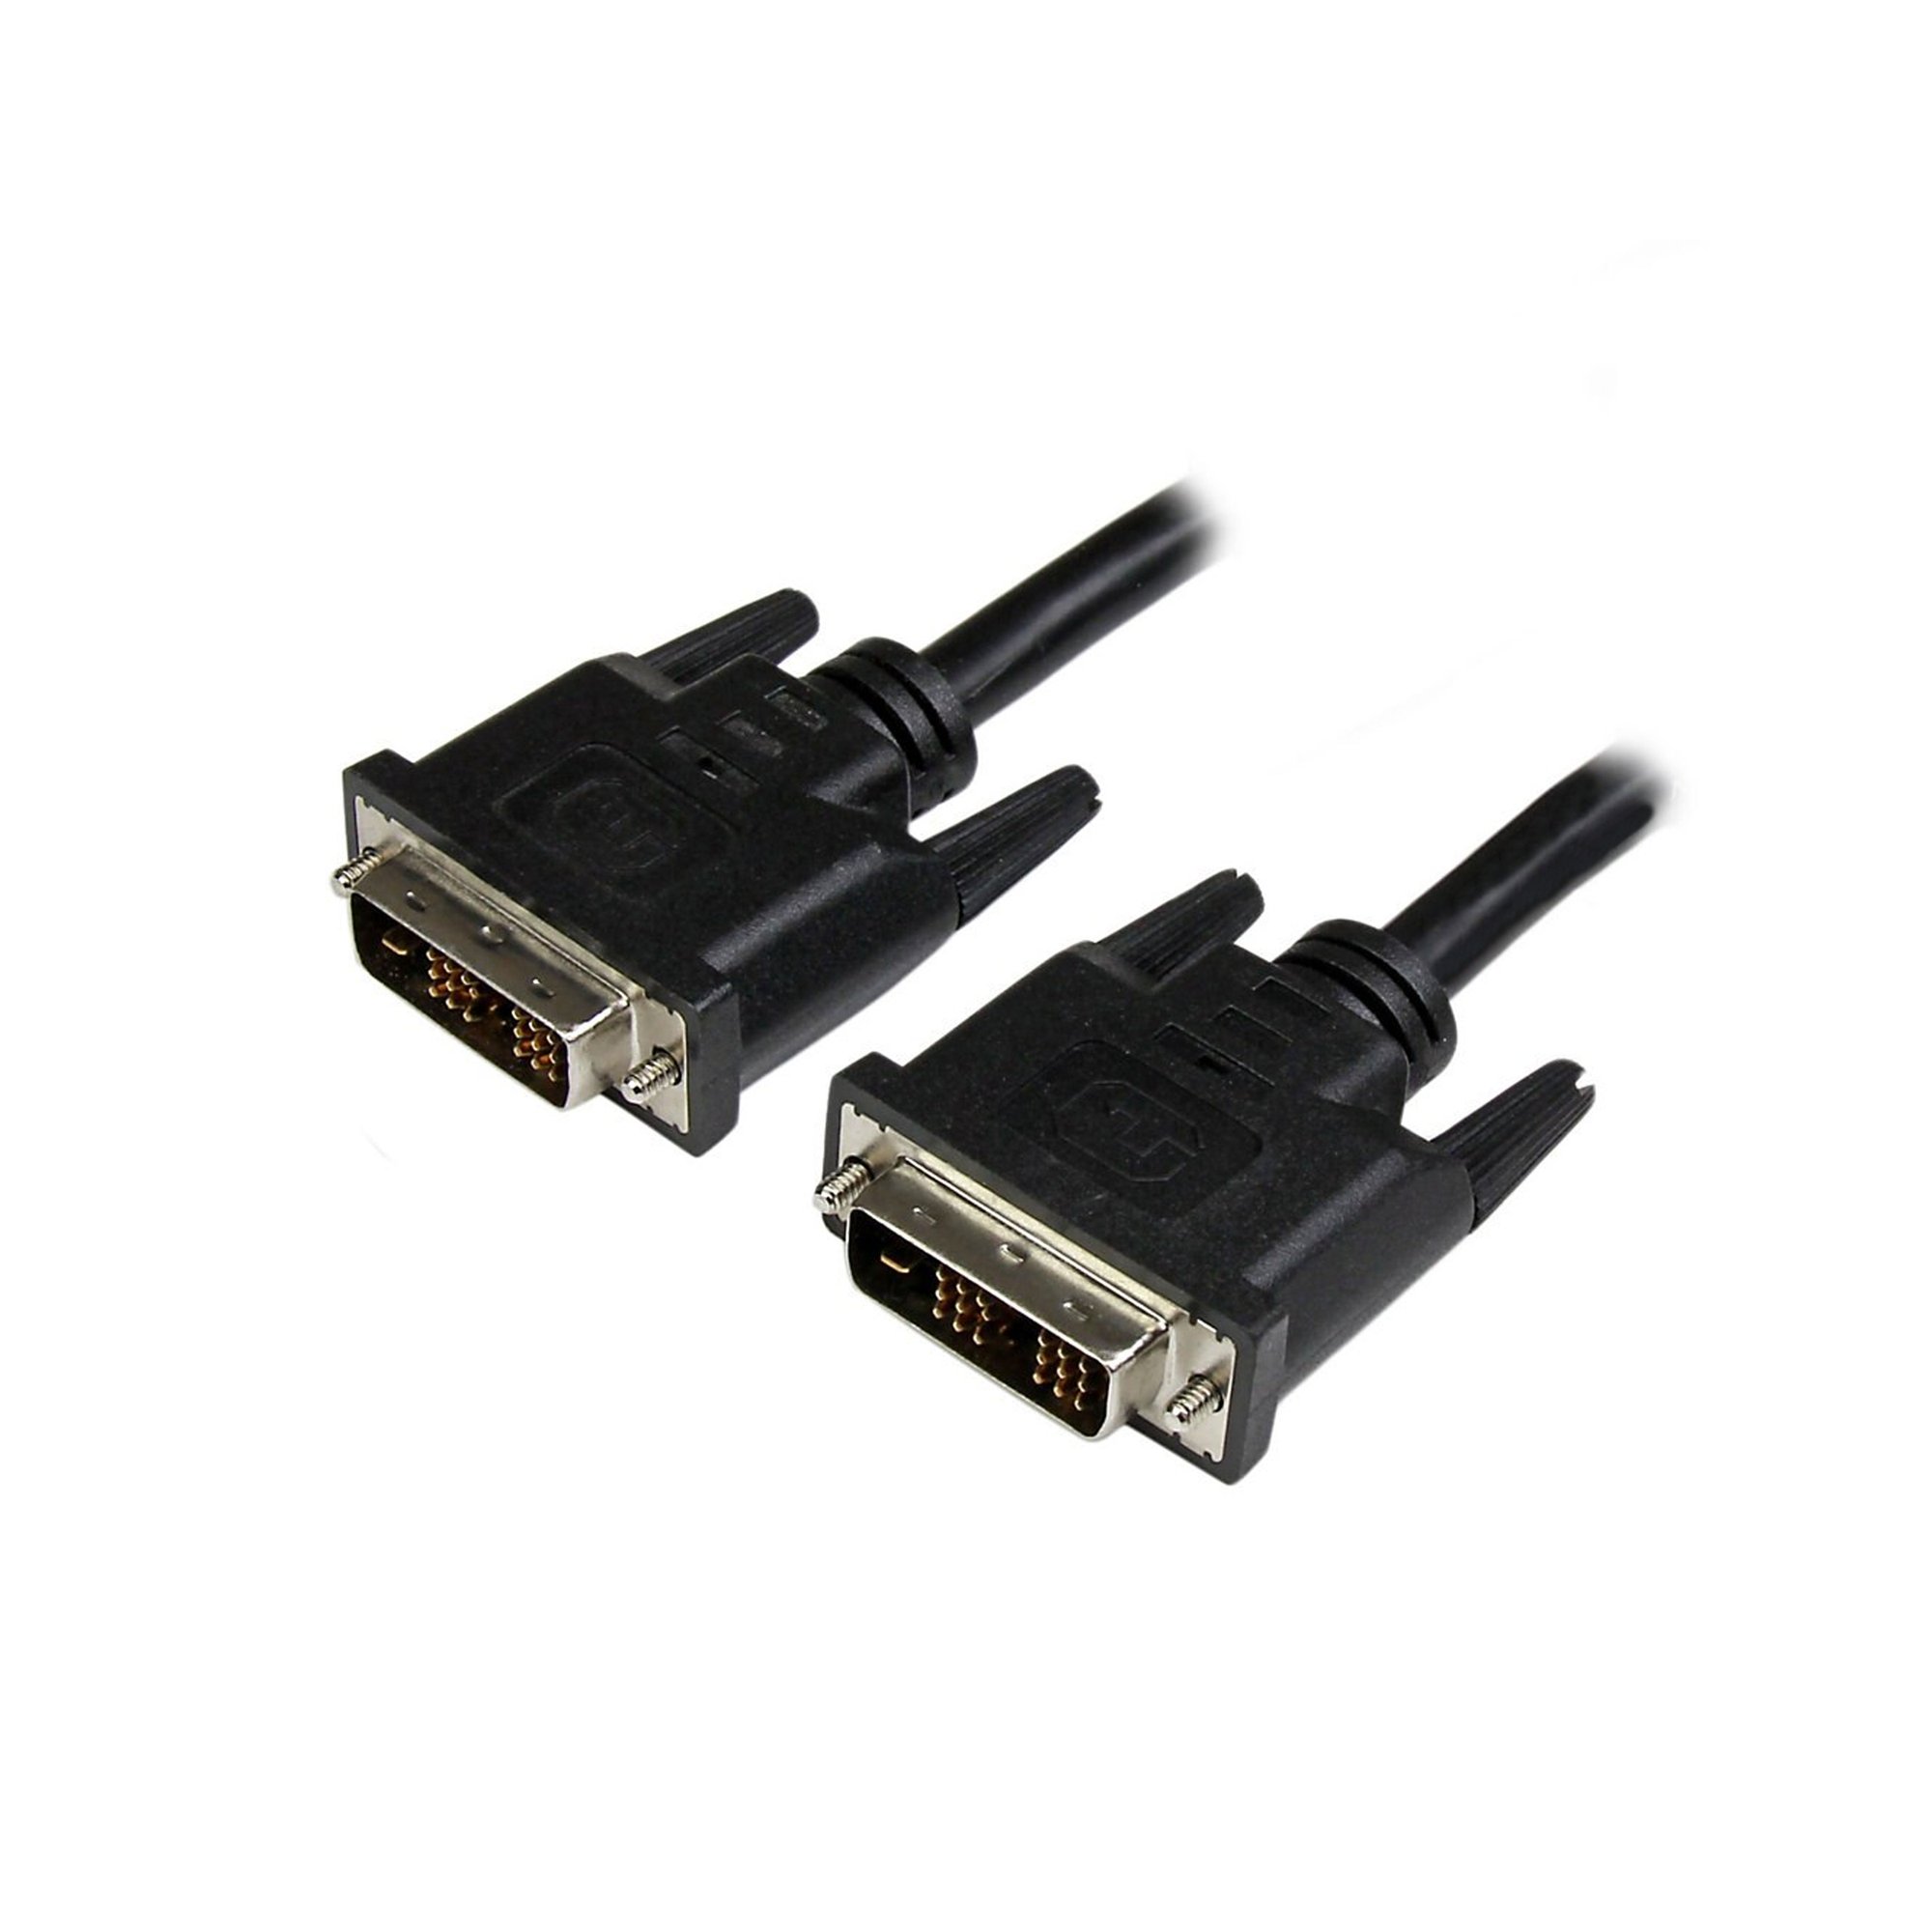 Cable Dvi Male To Dvi Male 6ft Argom  Arg-cb-1301 6ft